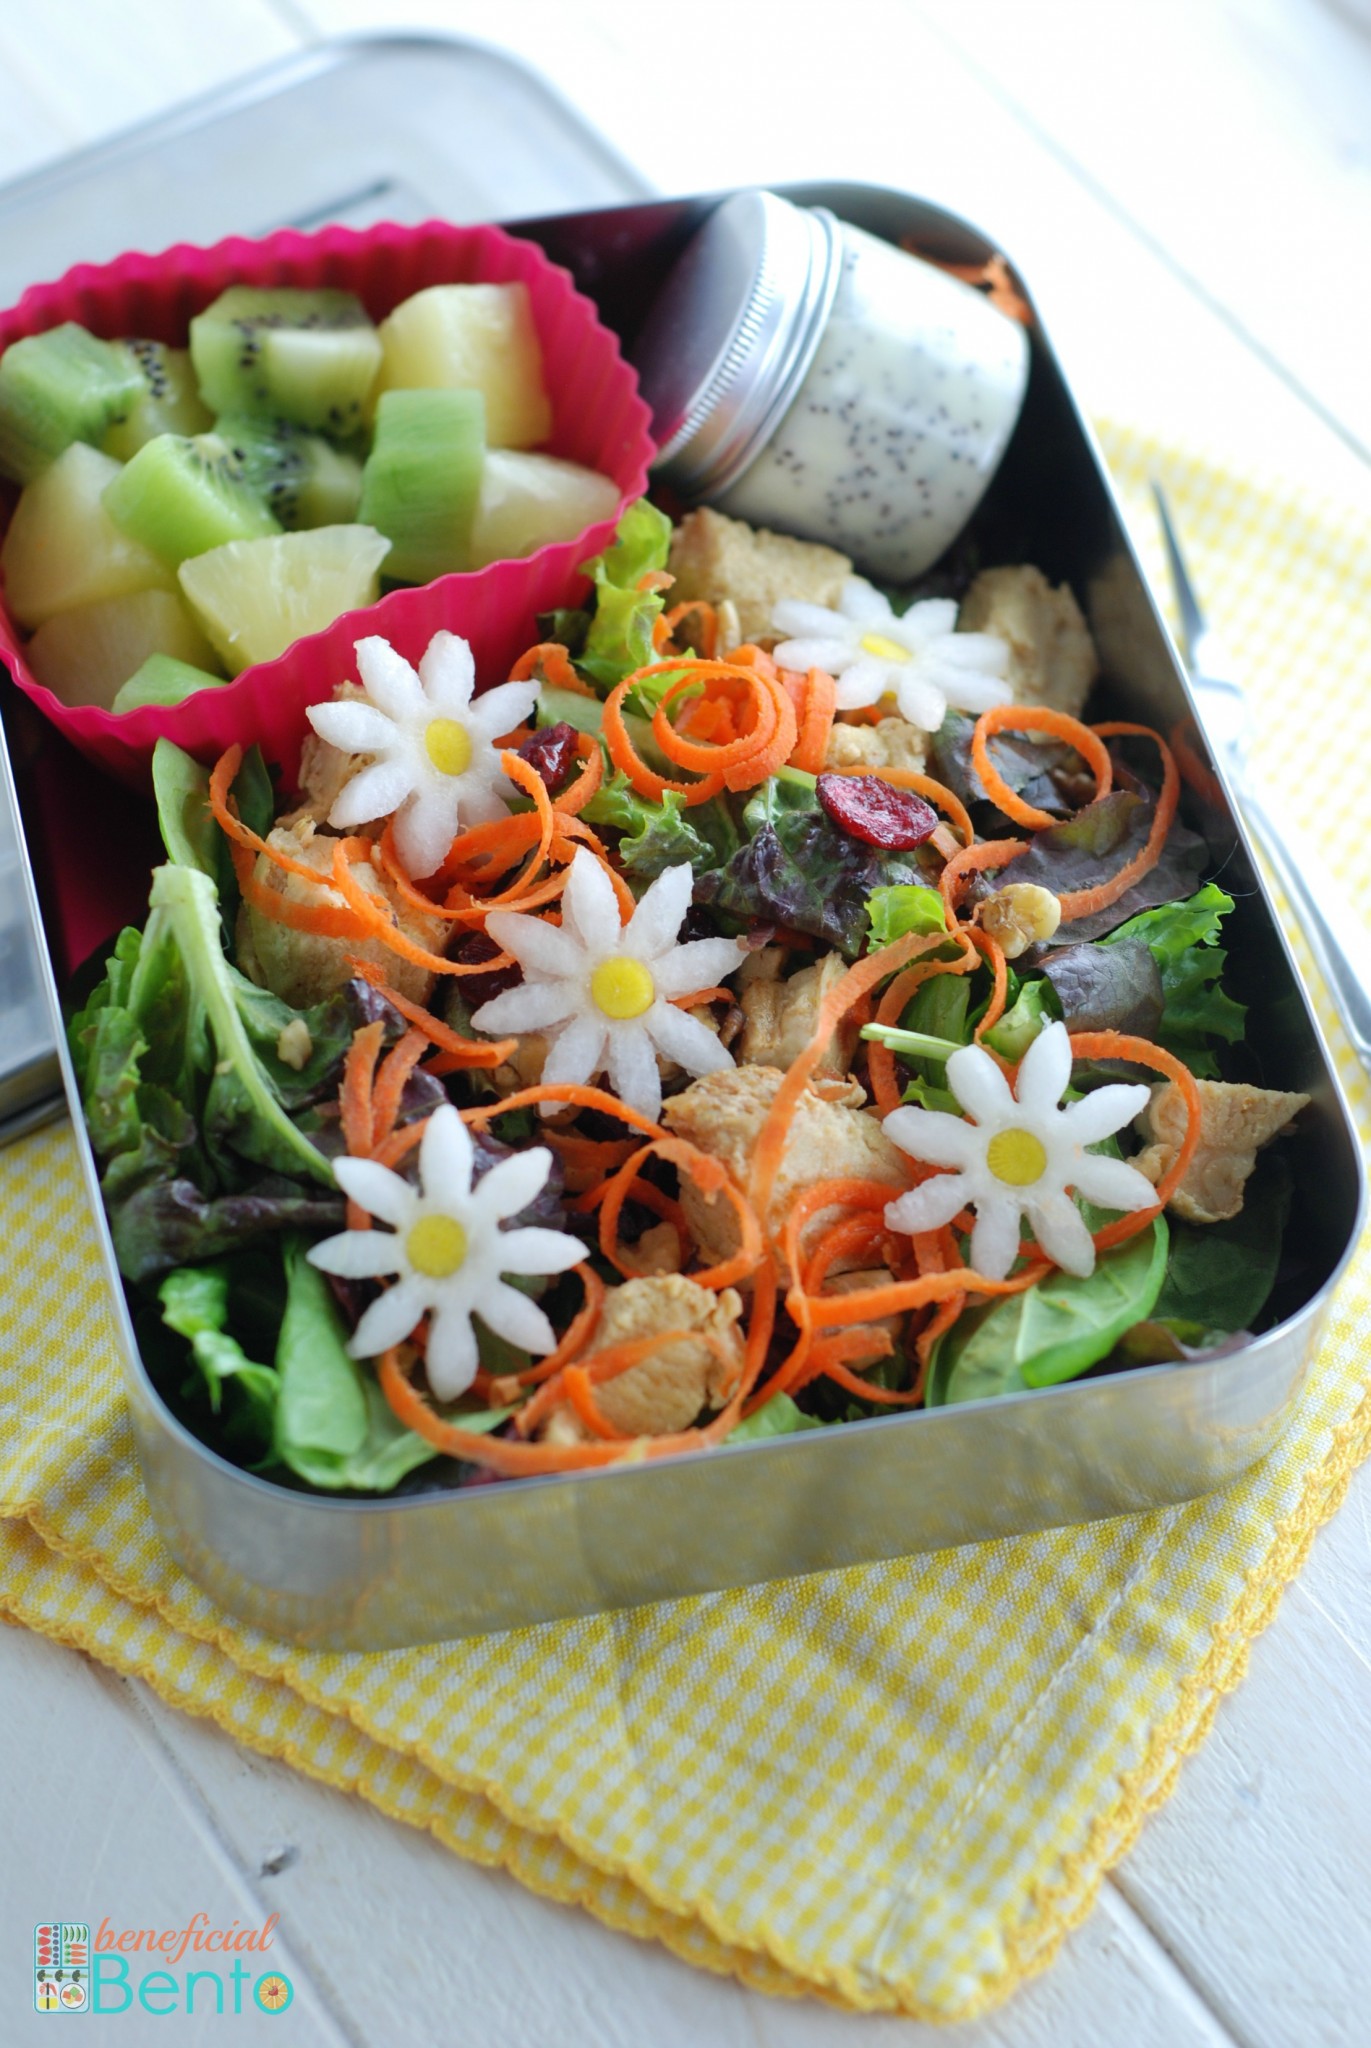 https://static.beneficial-bento.com/uploads/2015/04/Chicken-salad-with-poppy-seed-dressing-LunchBots.jpg